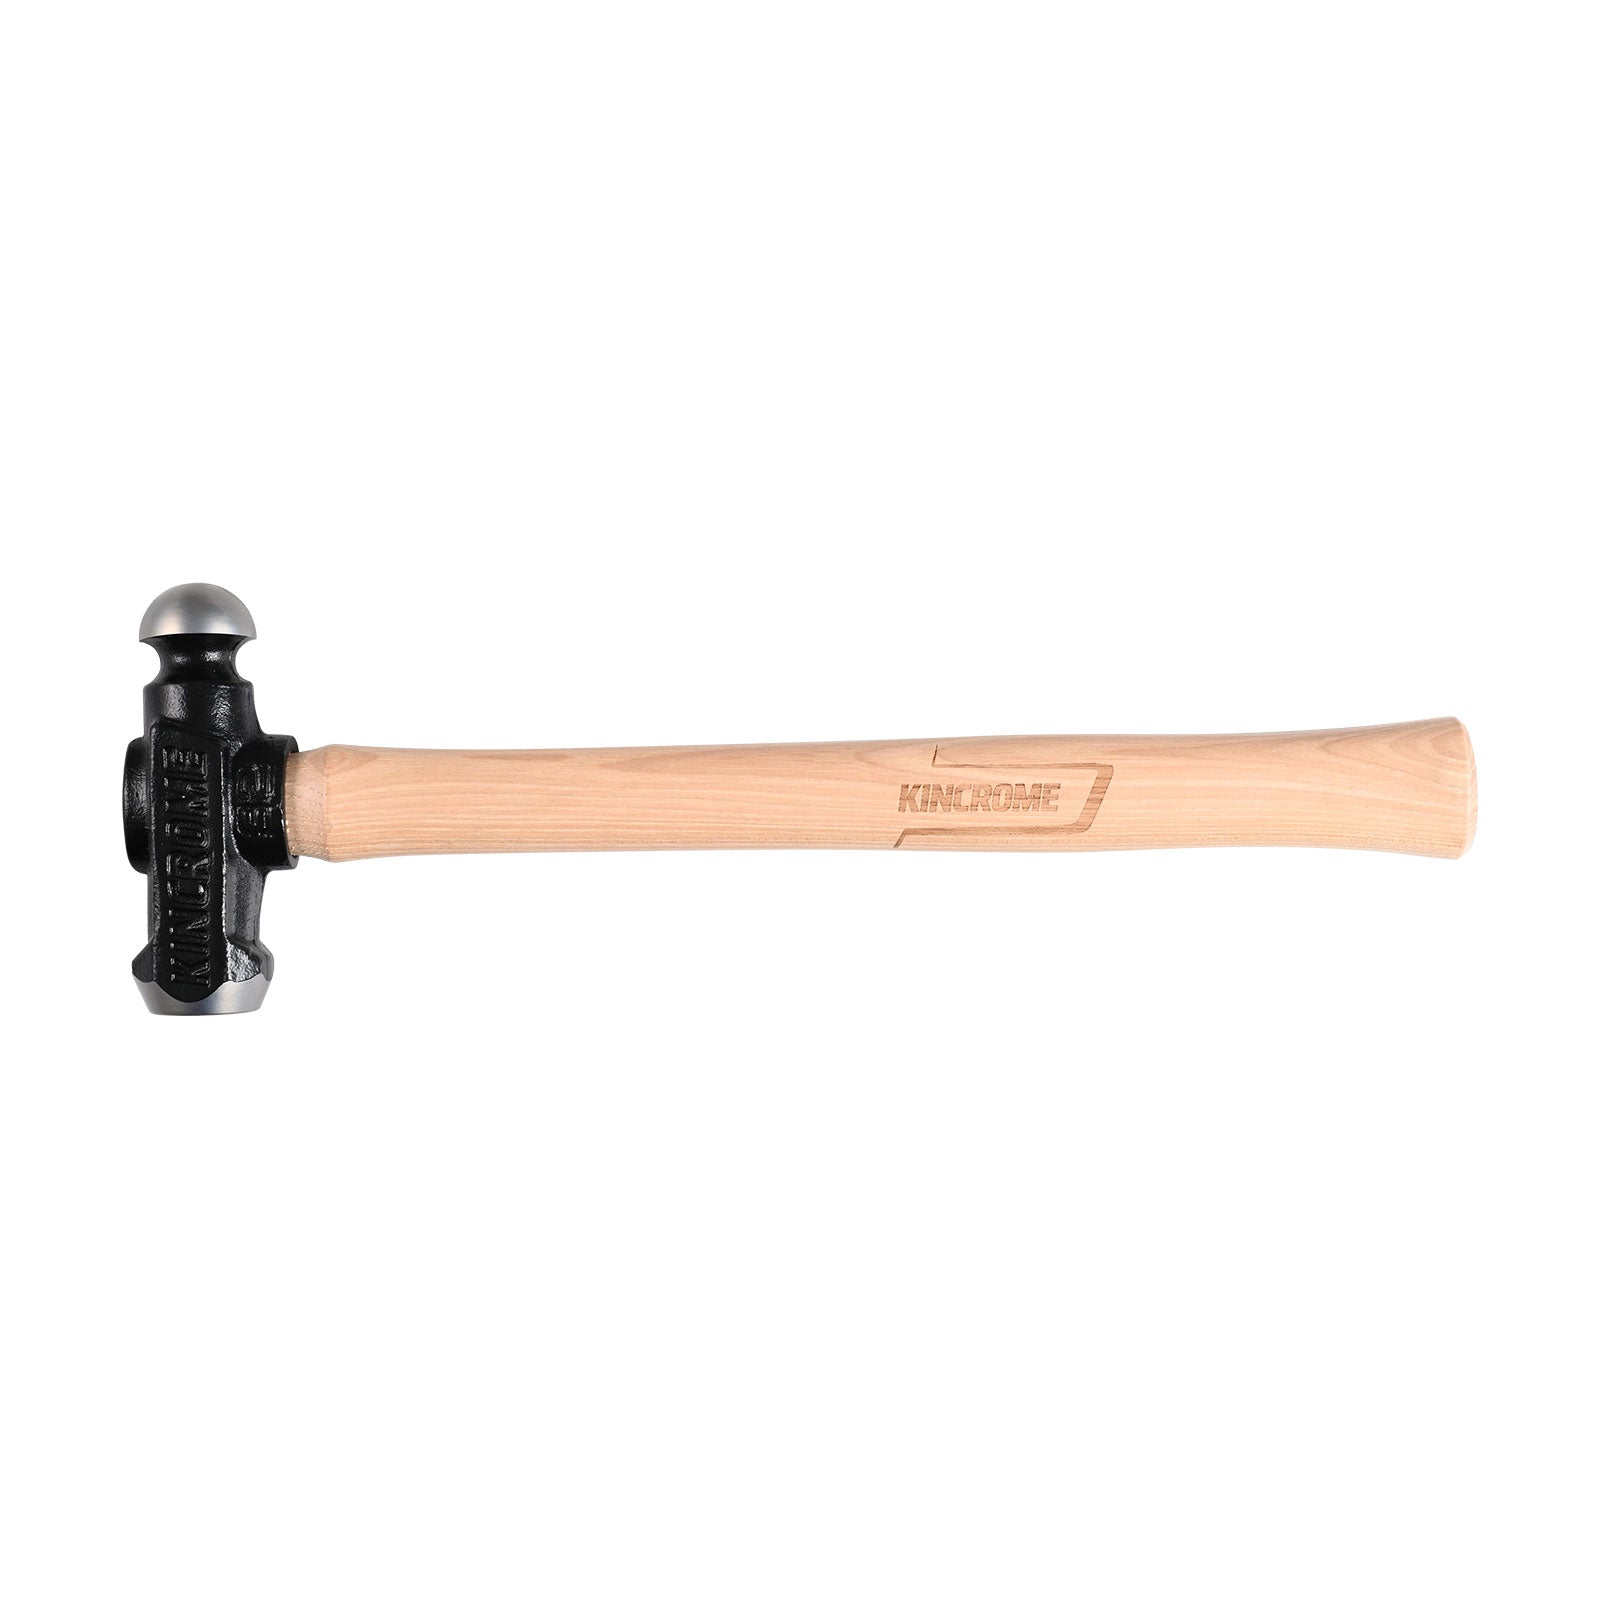 Ball Pein Hammer, Hickory by Kincrome